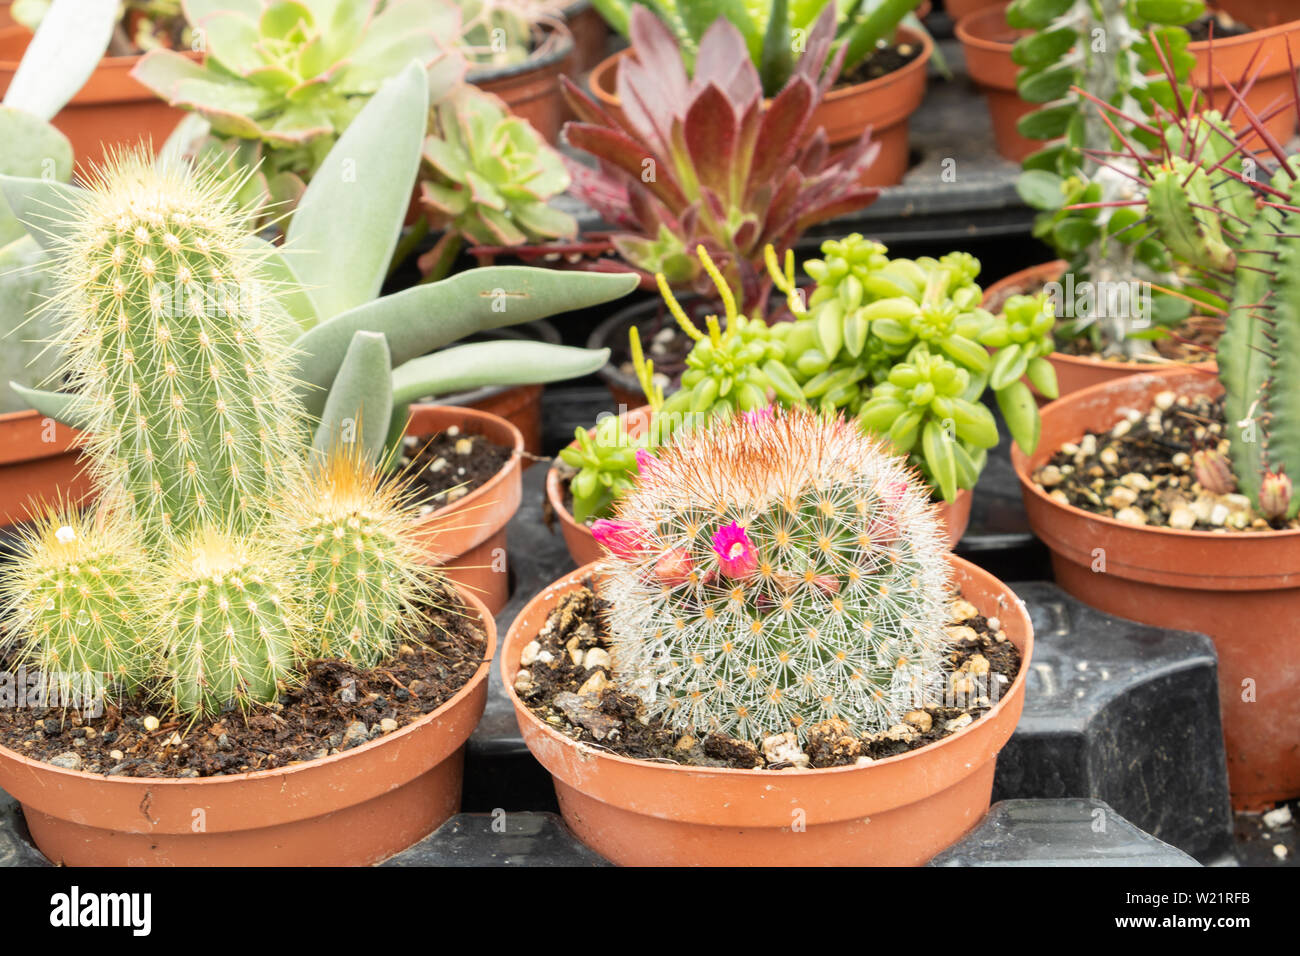 Different varieties of flowers and cacti and succulents, cacti and desert plants and arid soils Stock Photo